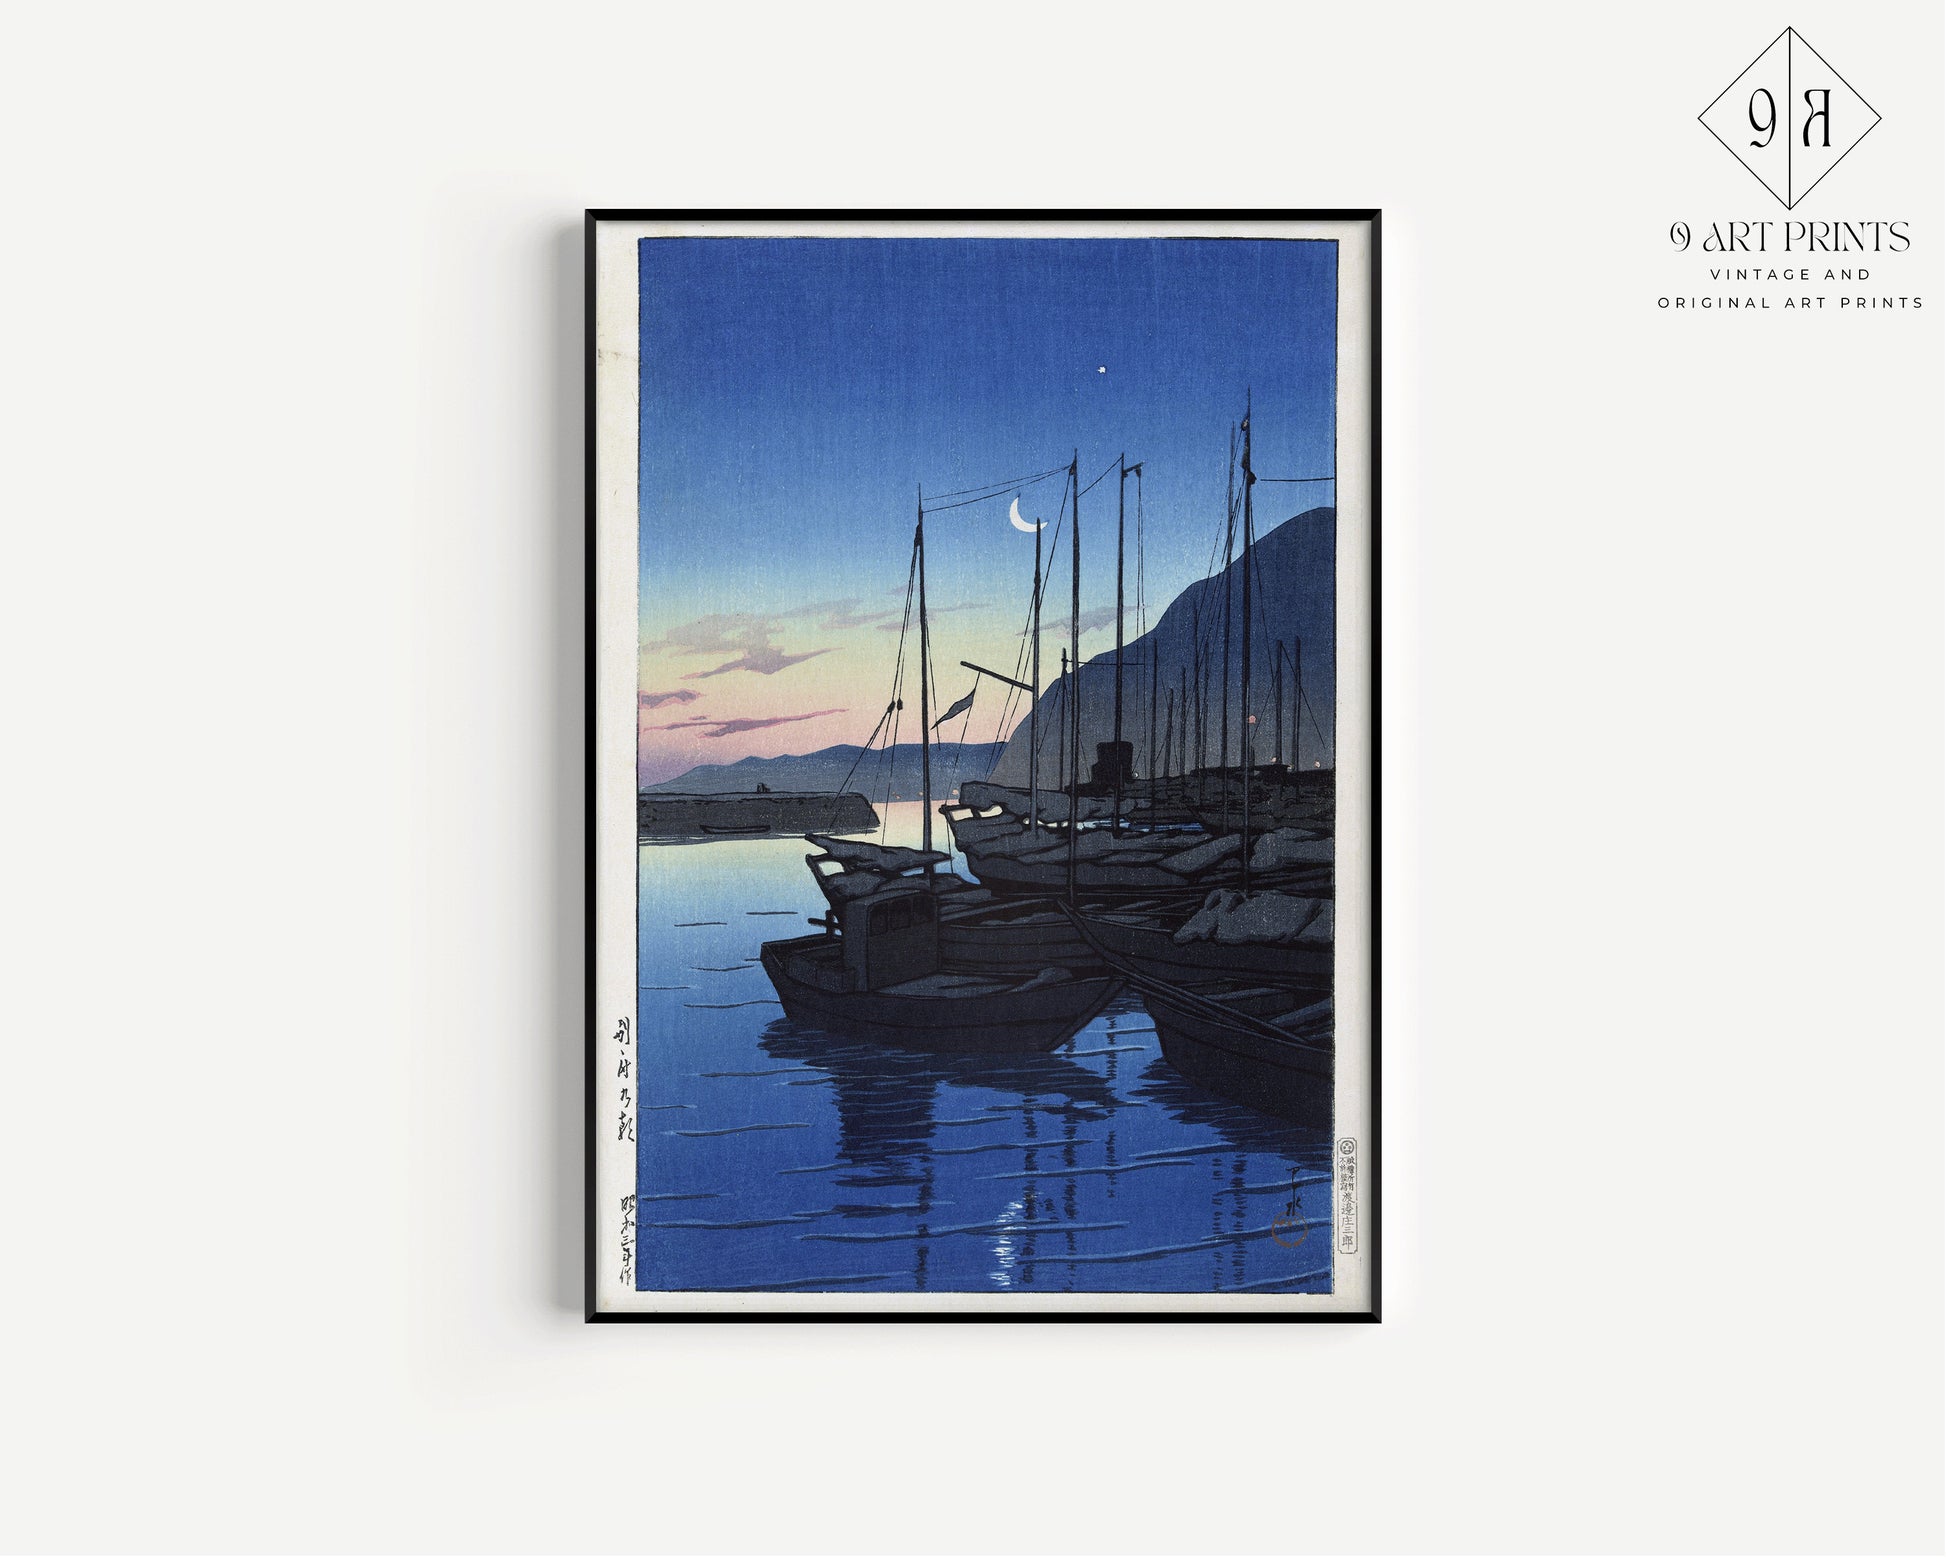 Kawase Hasui - Morning in Beppue | Vintage Japanese Woodcut Art (available framed or unframed)